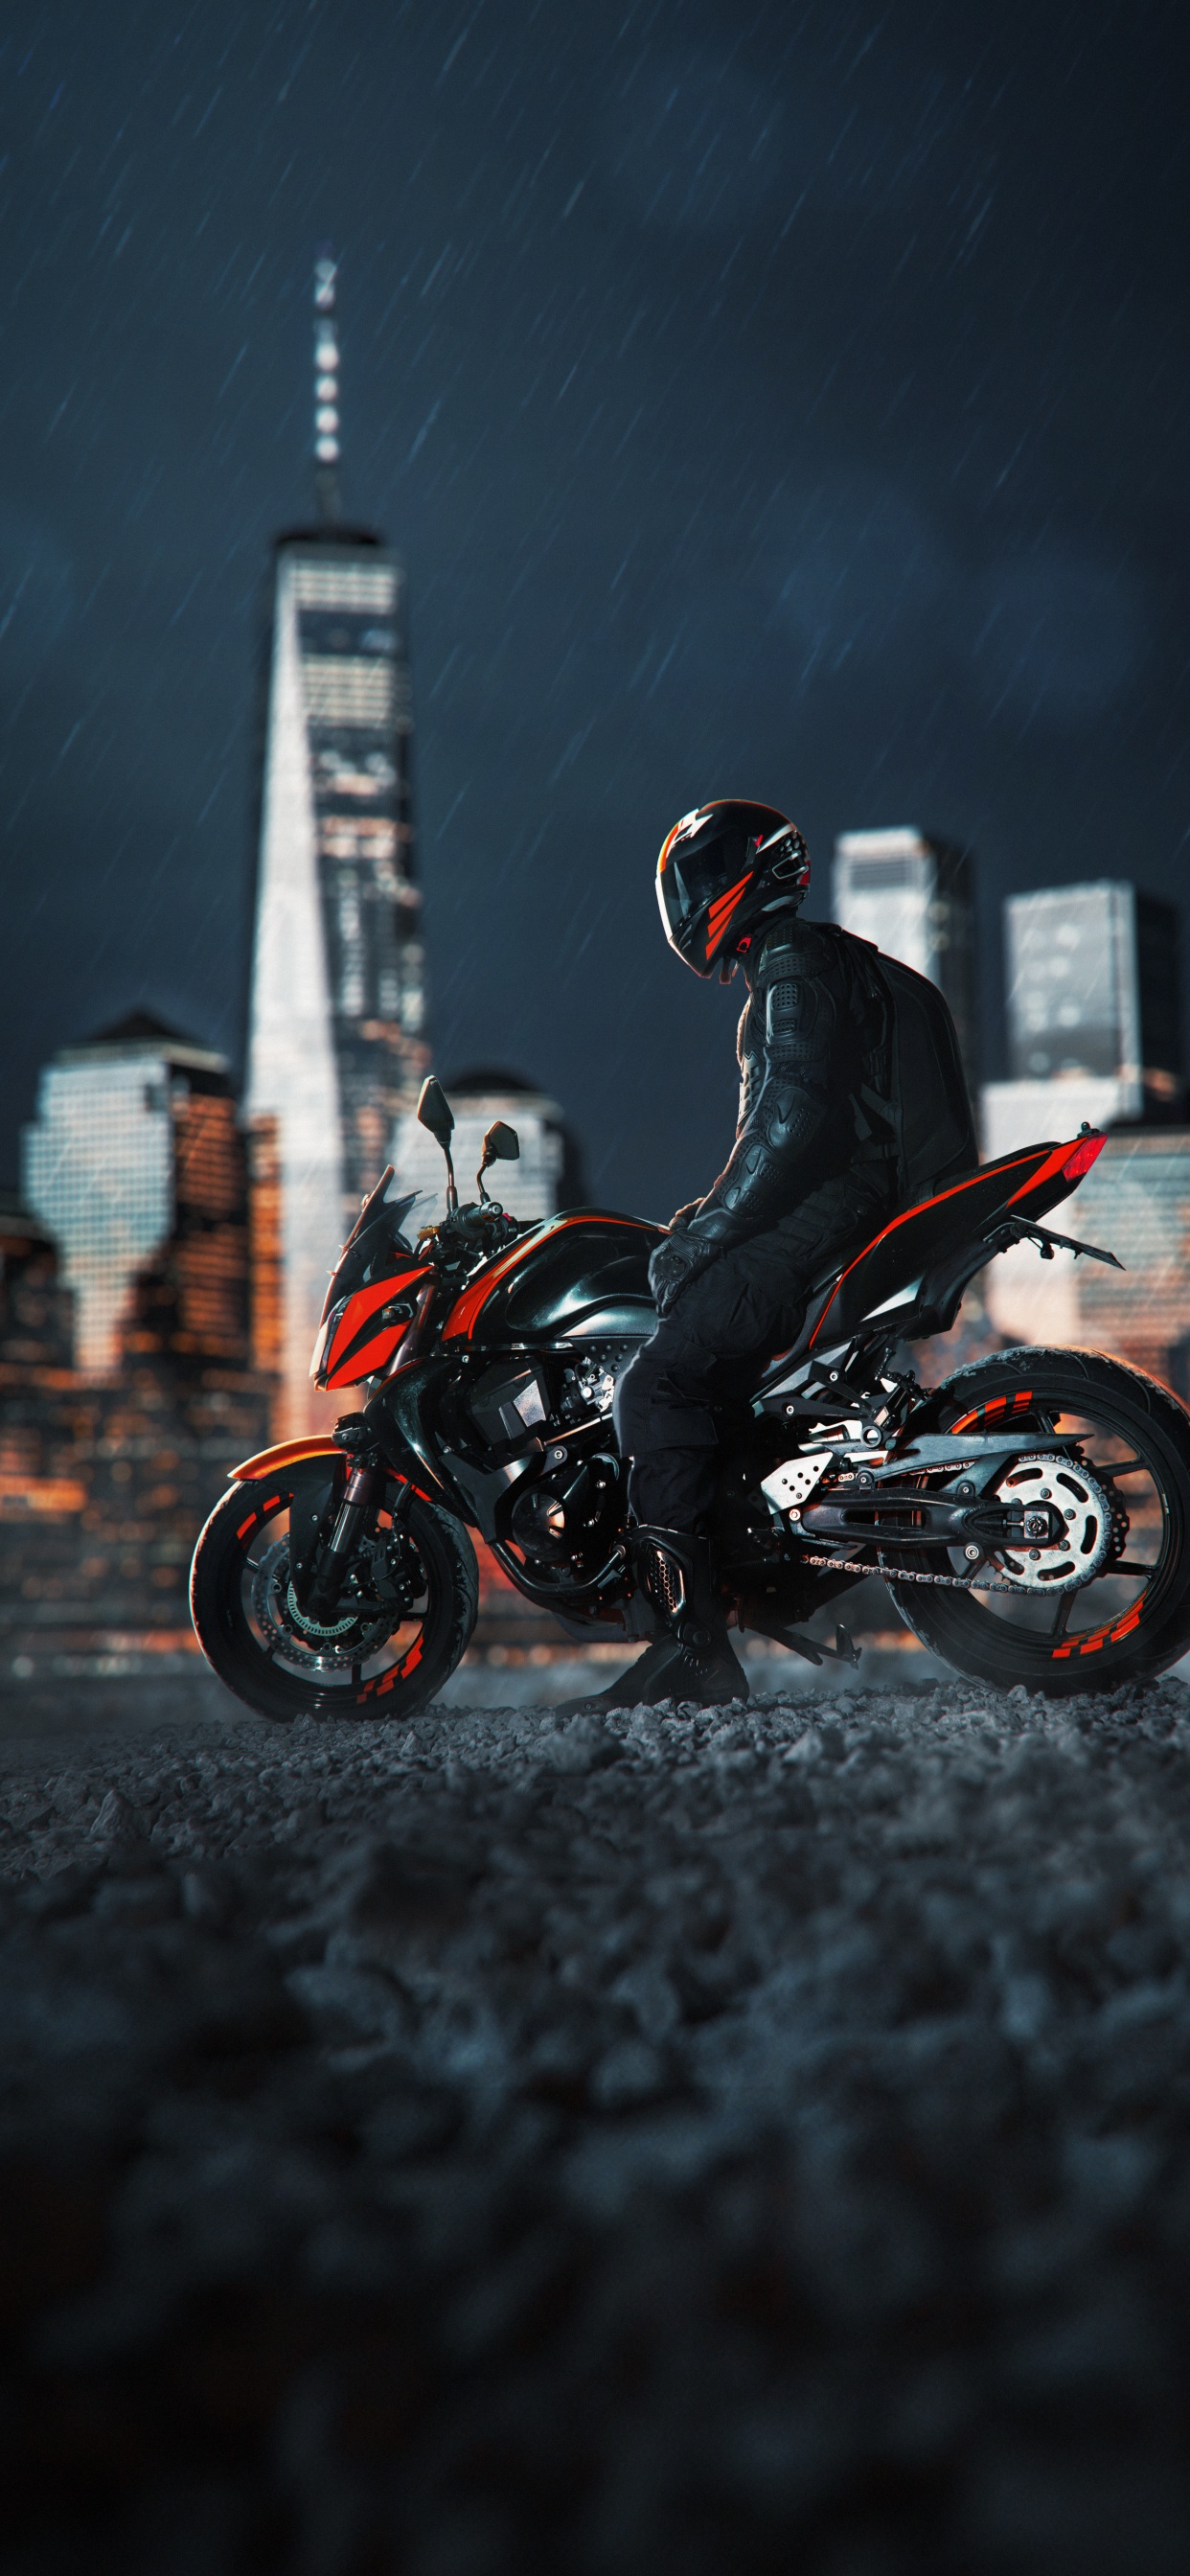 Motorcycle Wallpaper 68 pictures